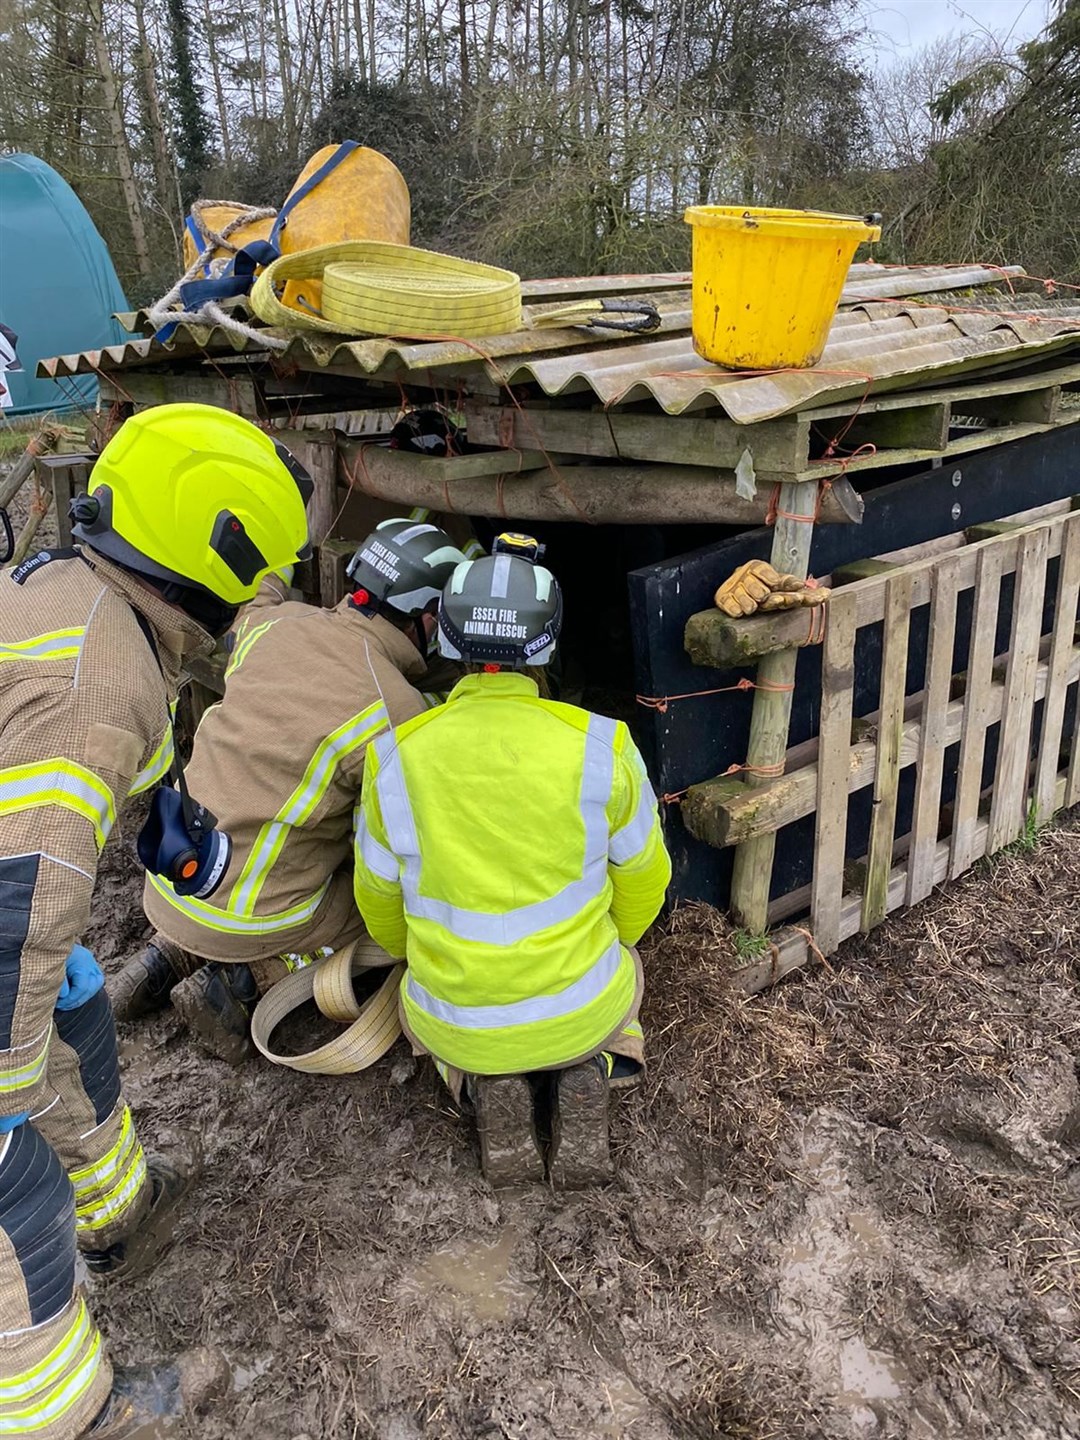 Dolly went for a lie down in her sty and got stuck in the mud (Essex County Fire and Rescue Service/ PA)